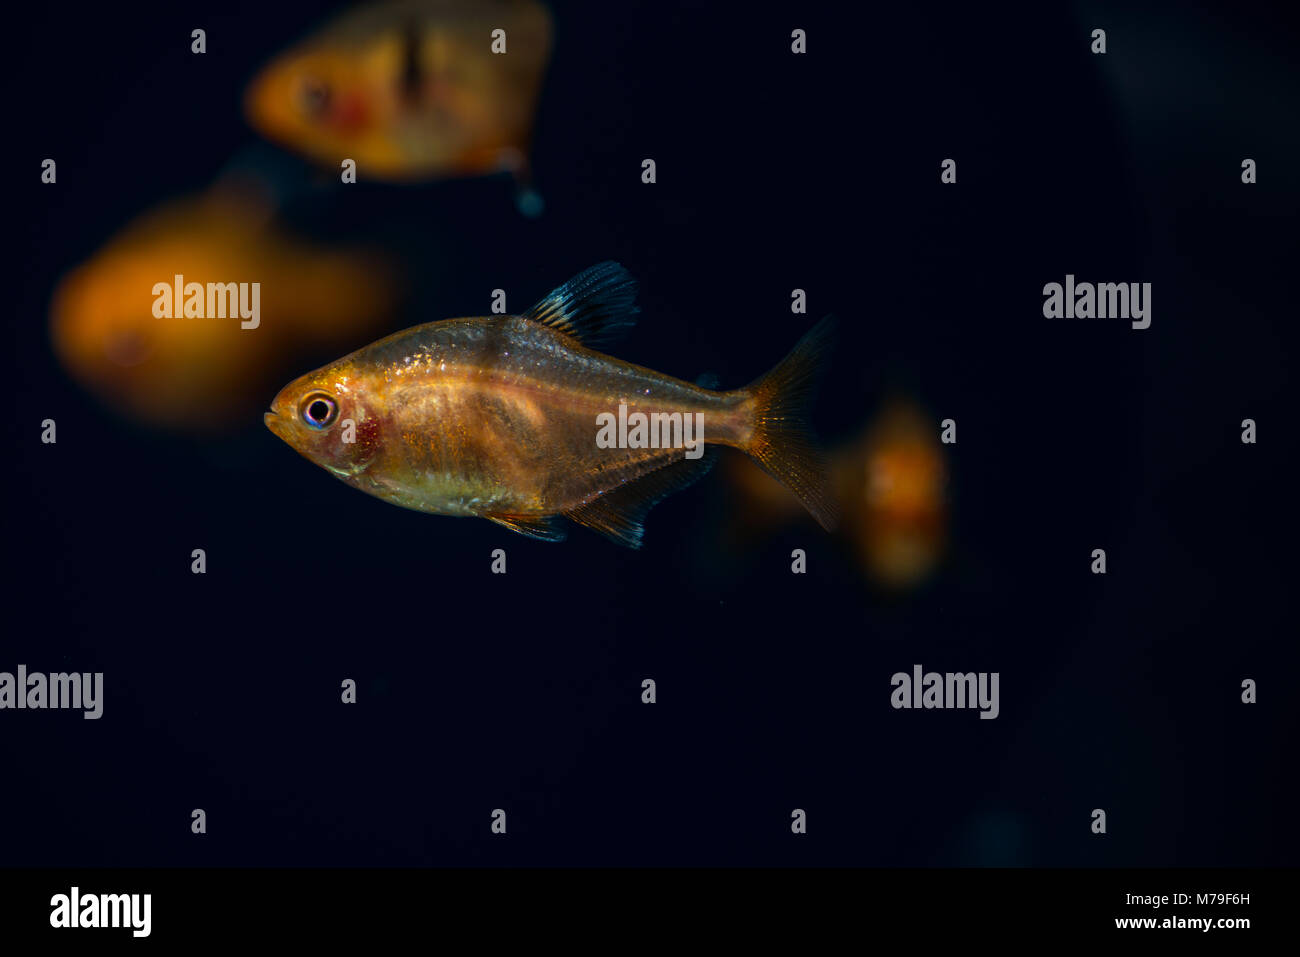 Some fish in a freshwater aquarium. Stock Photo